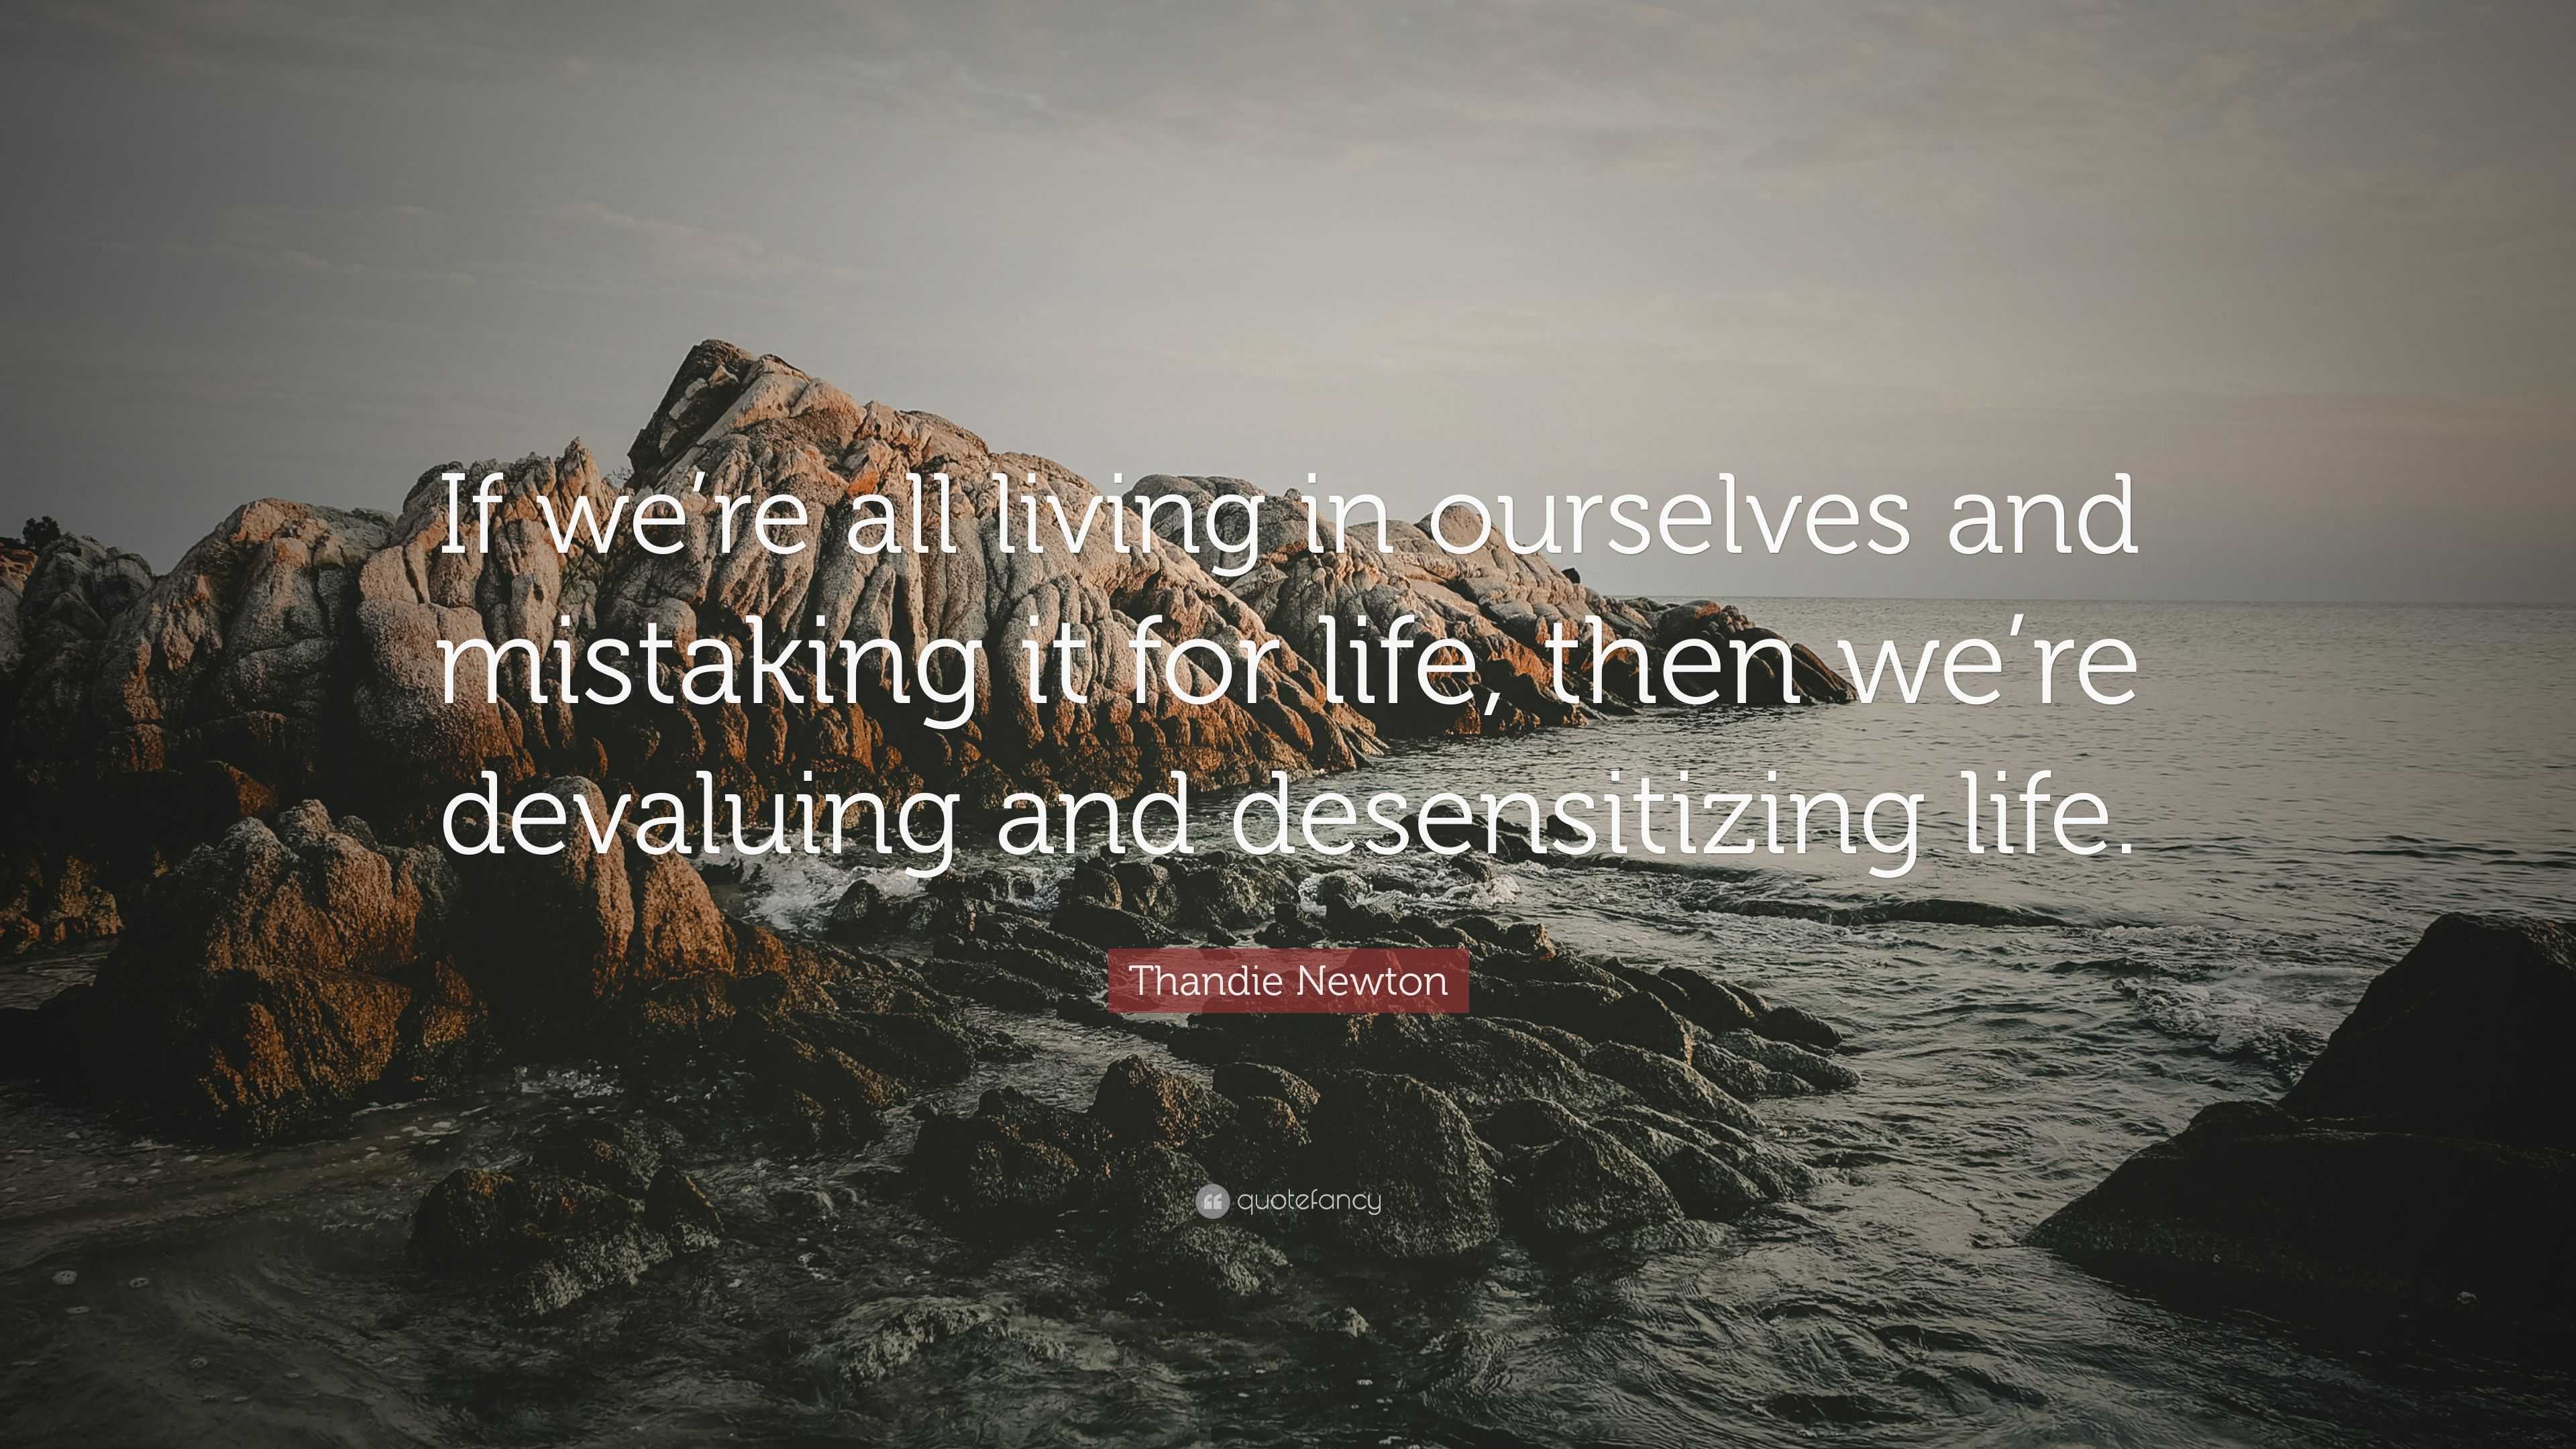 Thandie Newton Quote: “If we’re all living in ourselves and mistaking ...